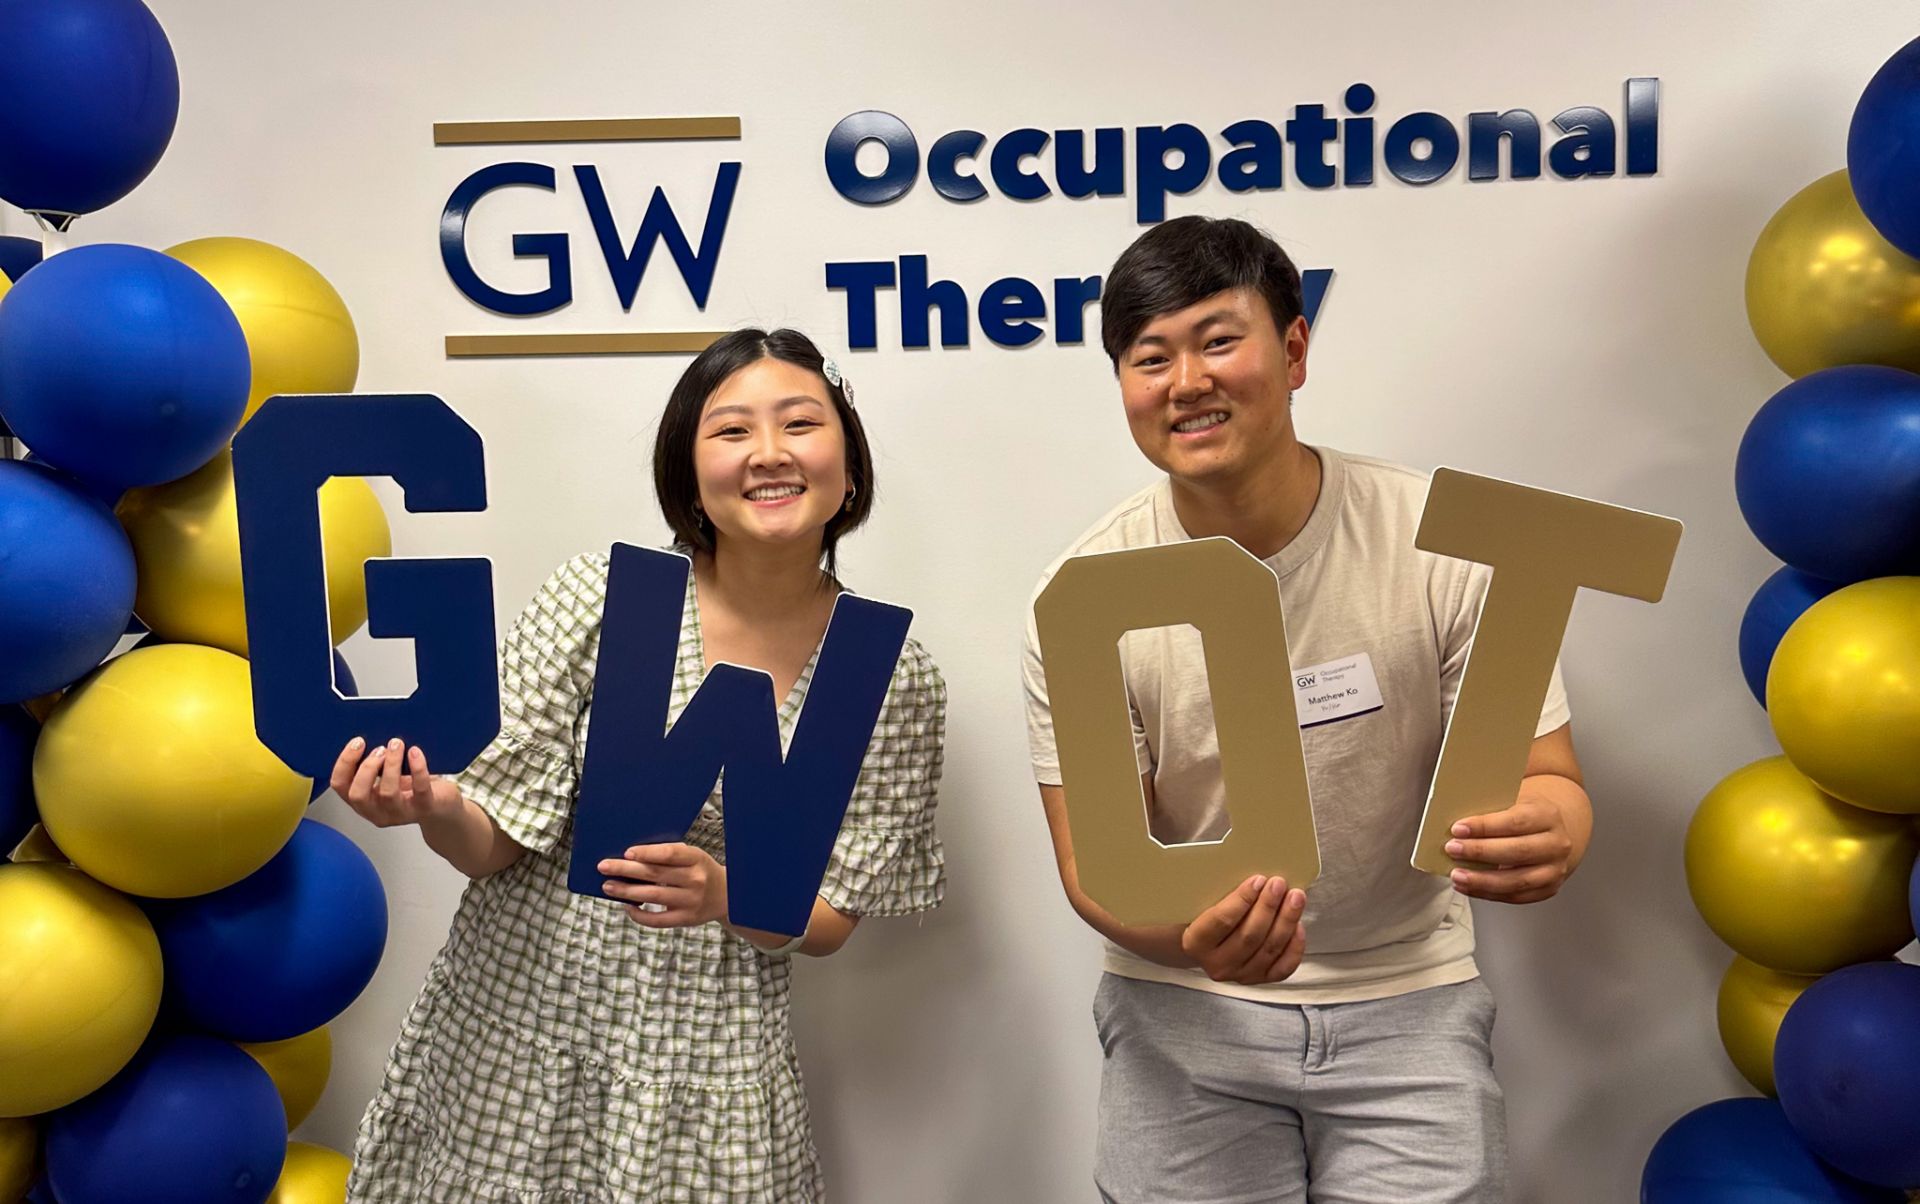 student and friend holding GW OT letters smiling in front of sign